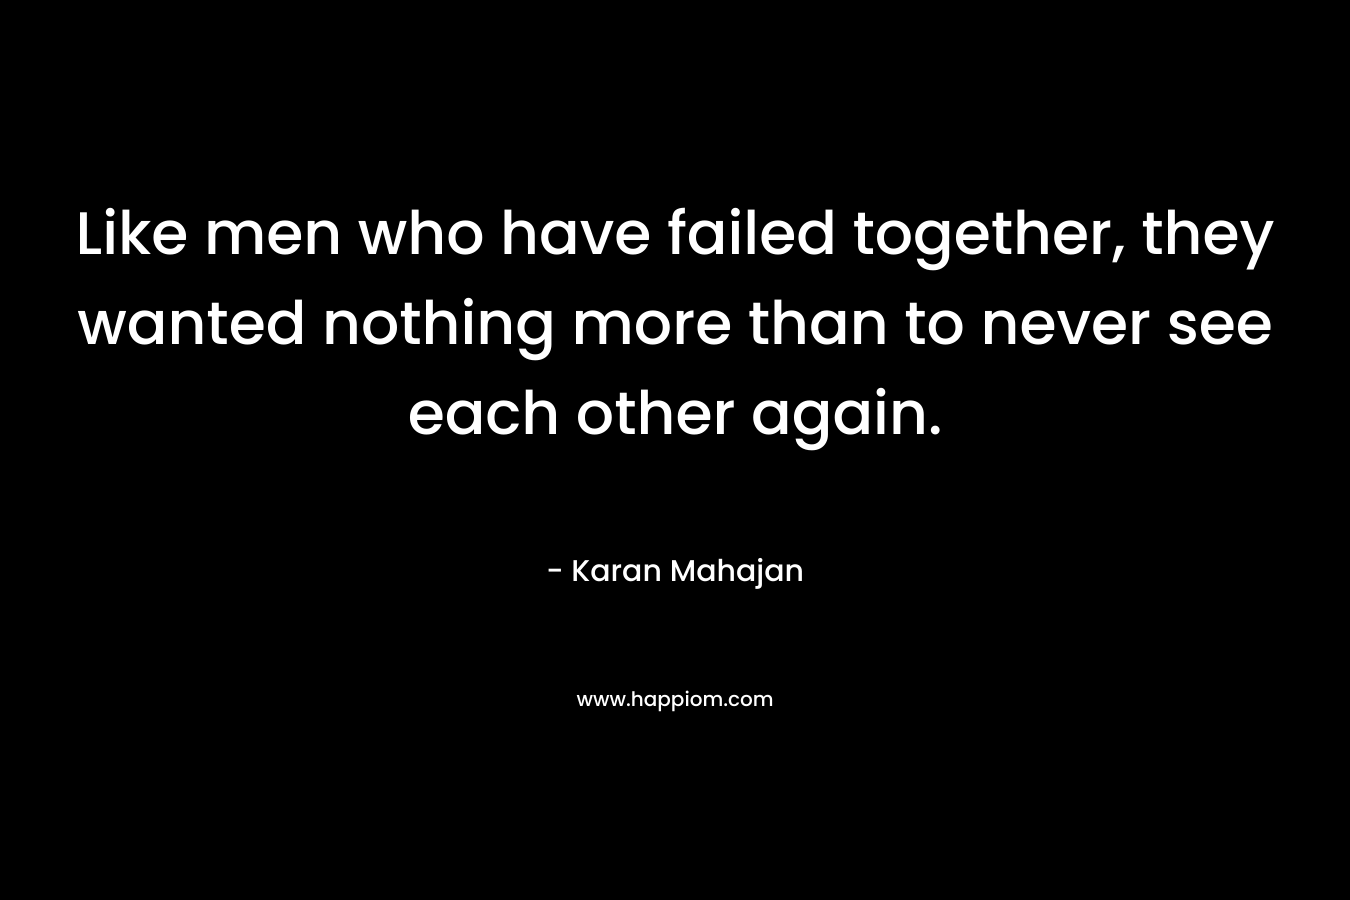 Like men who have failed together, they wanted nothing more than to never see each other again. – Karan Mahajan